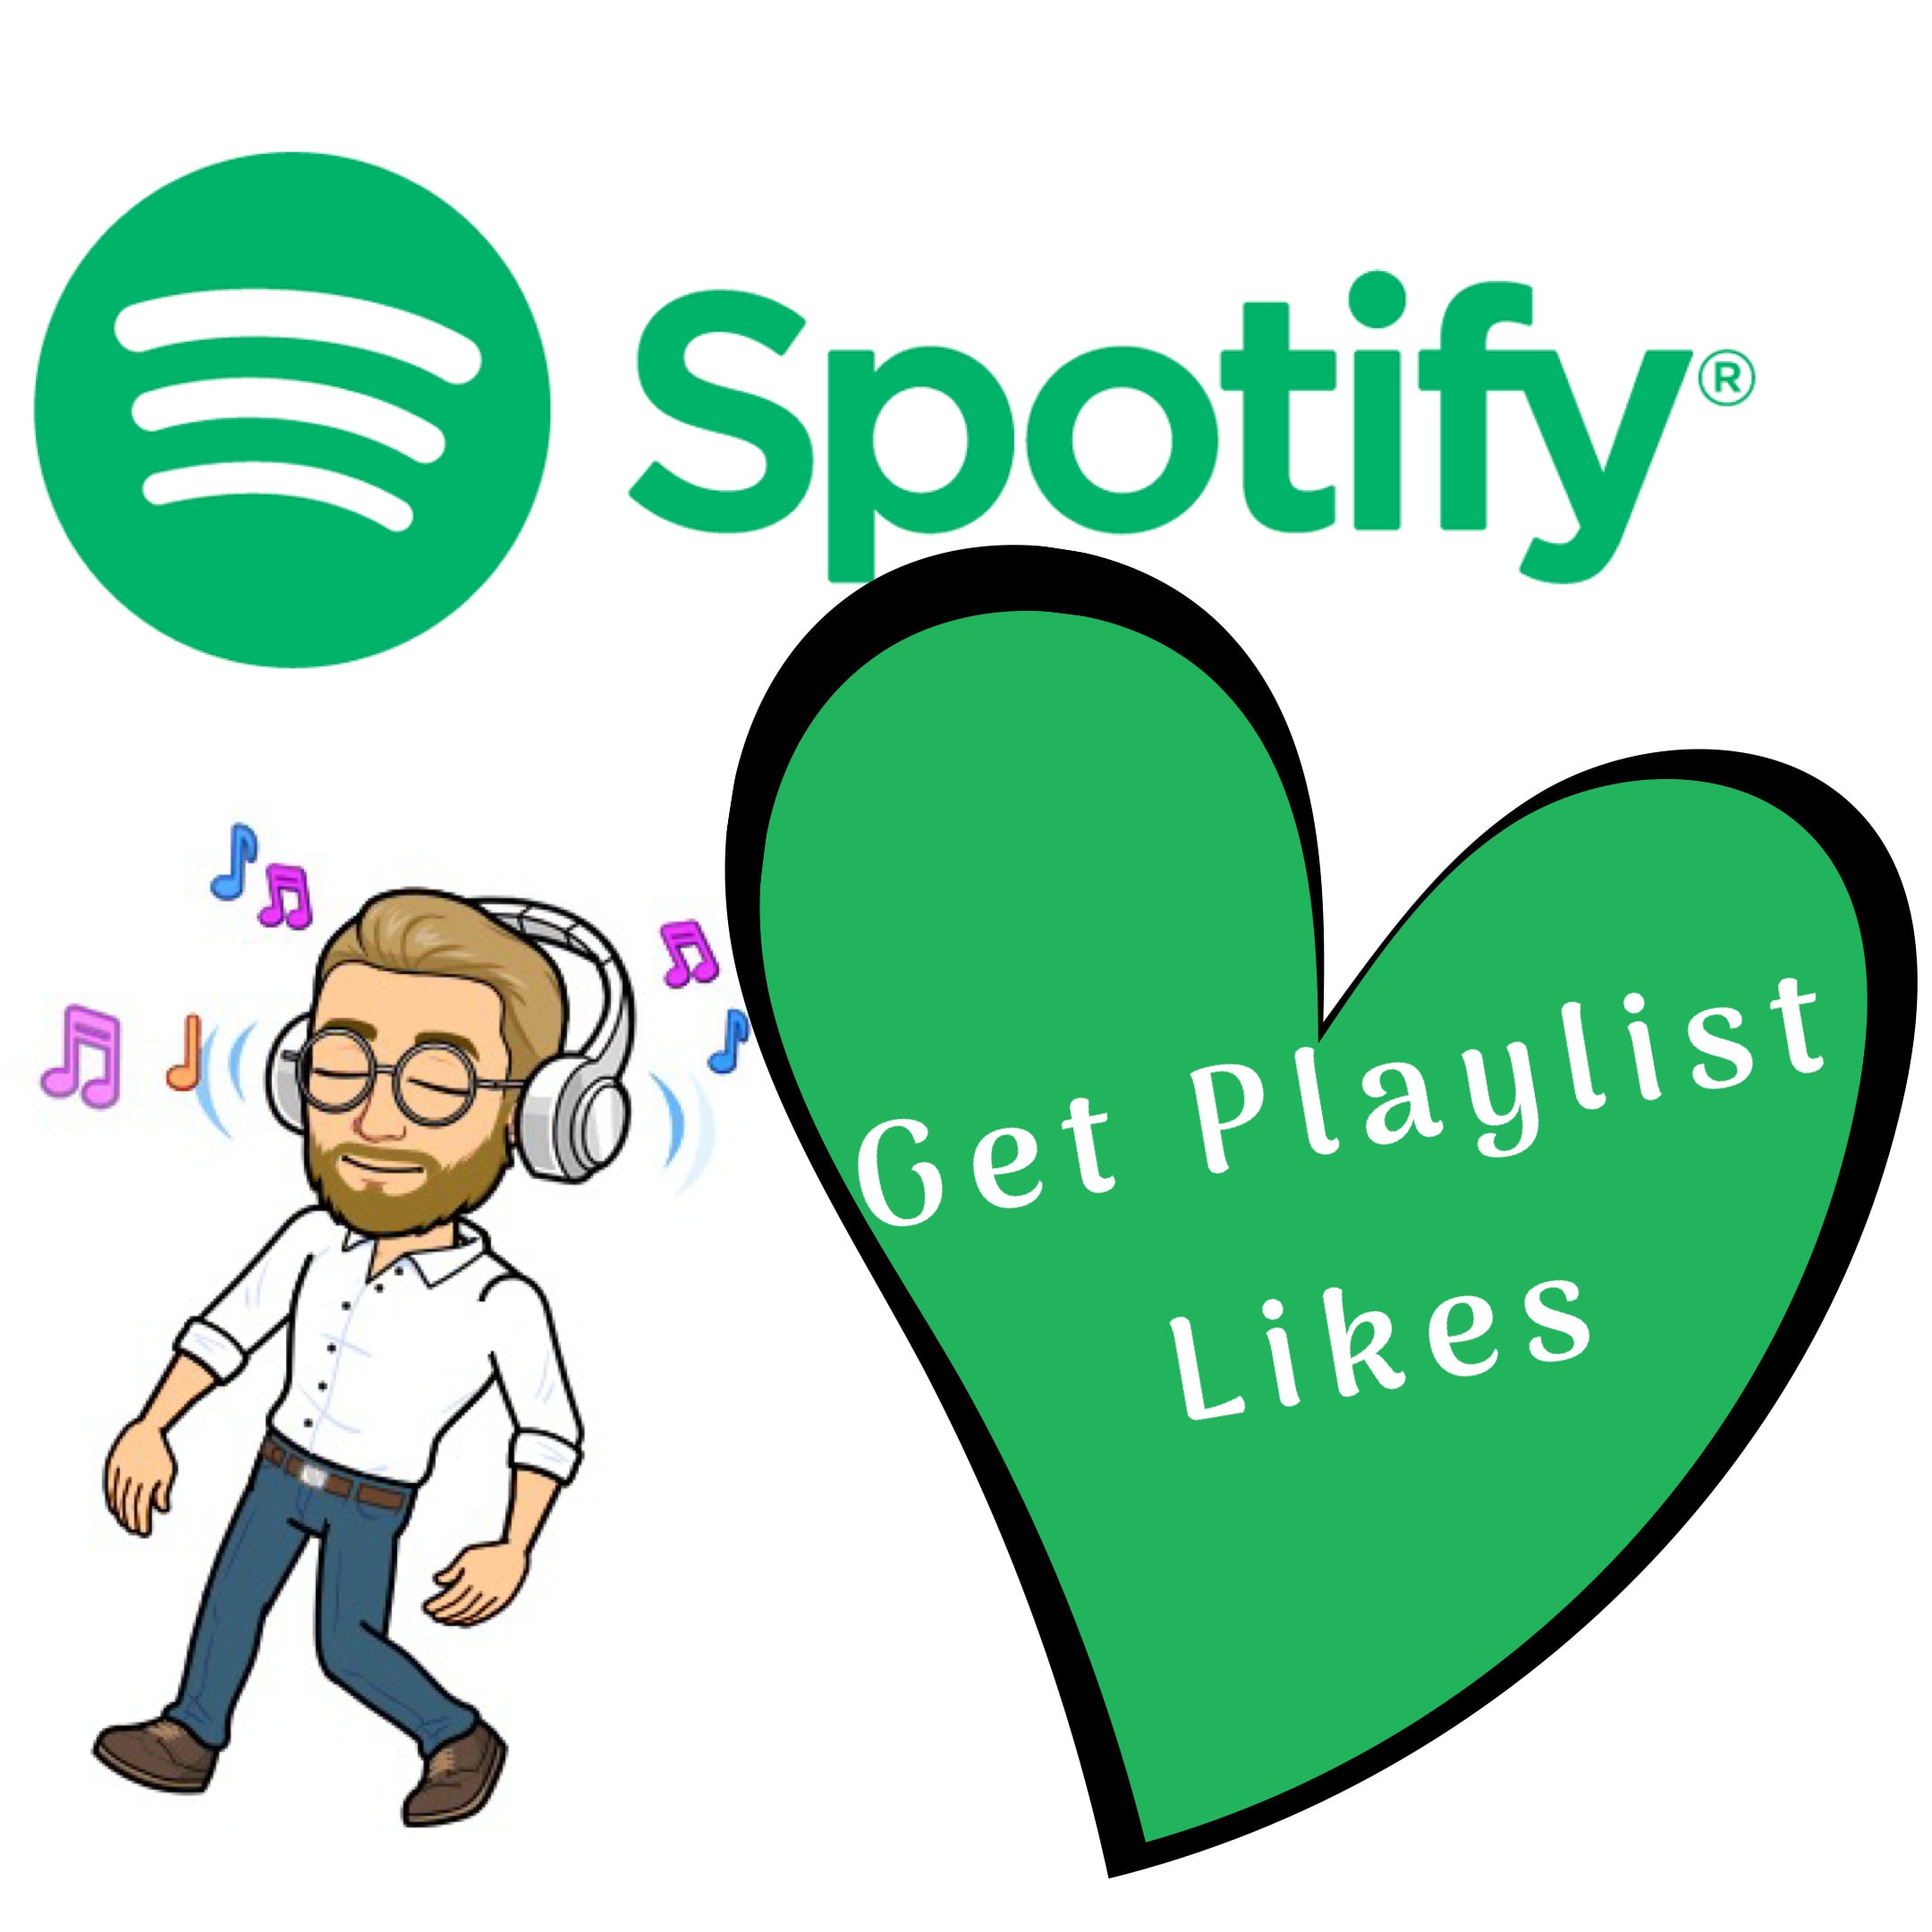 Get 1000 real likes for one spotify playlist no bots by Joshuajarrott